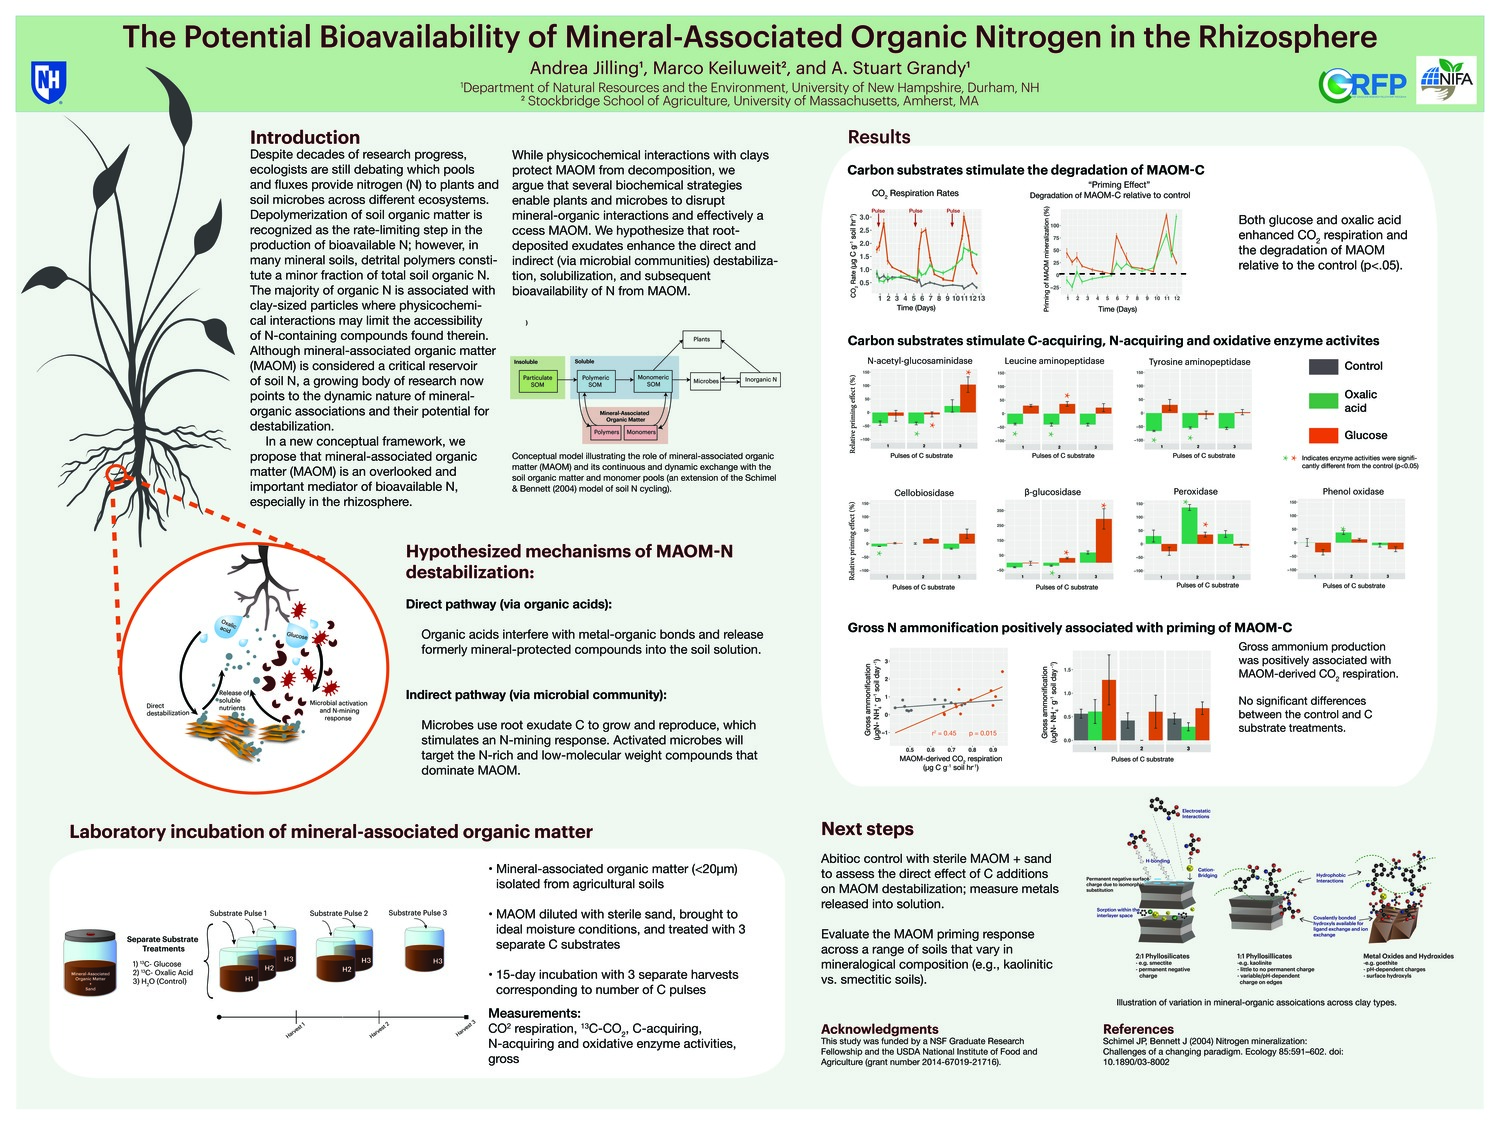 The Potential Bioavailability Of Mineral-Associated Organic Nitrogen In The Rhizosphere by andreajilling